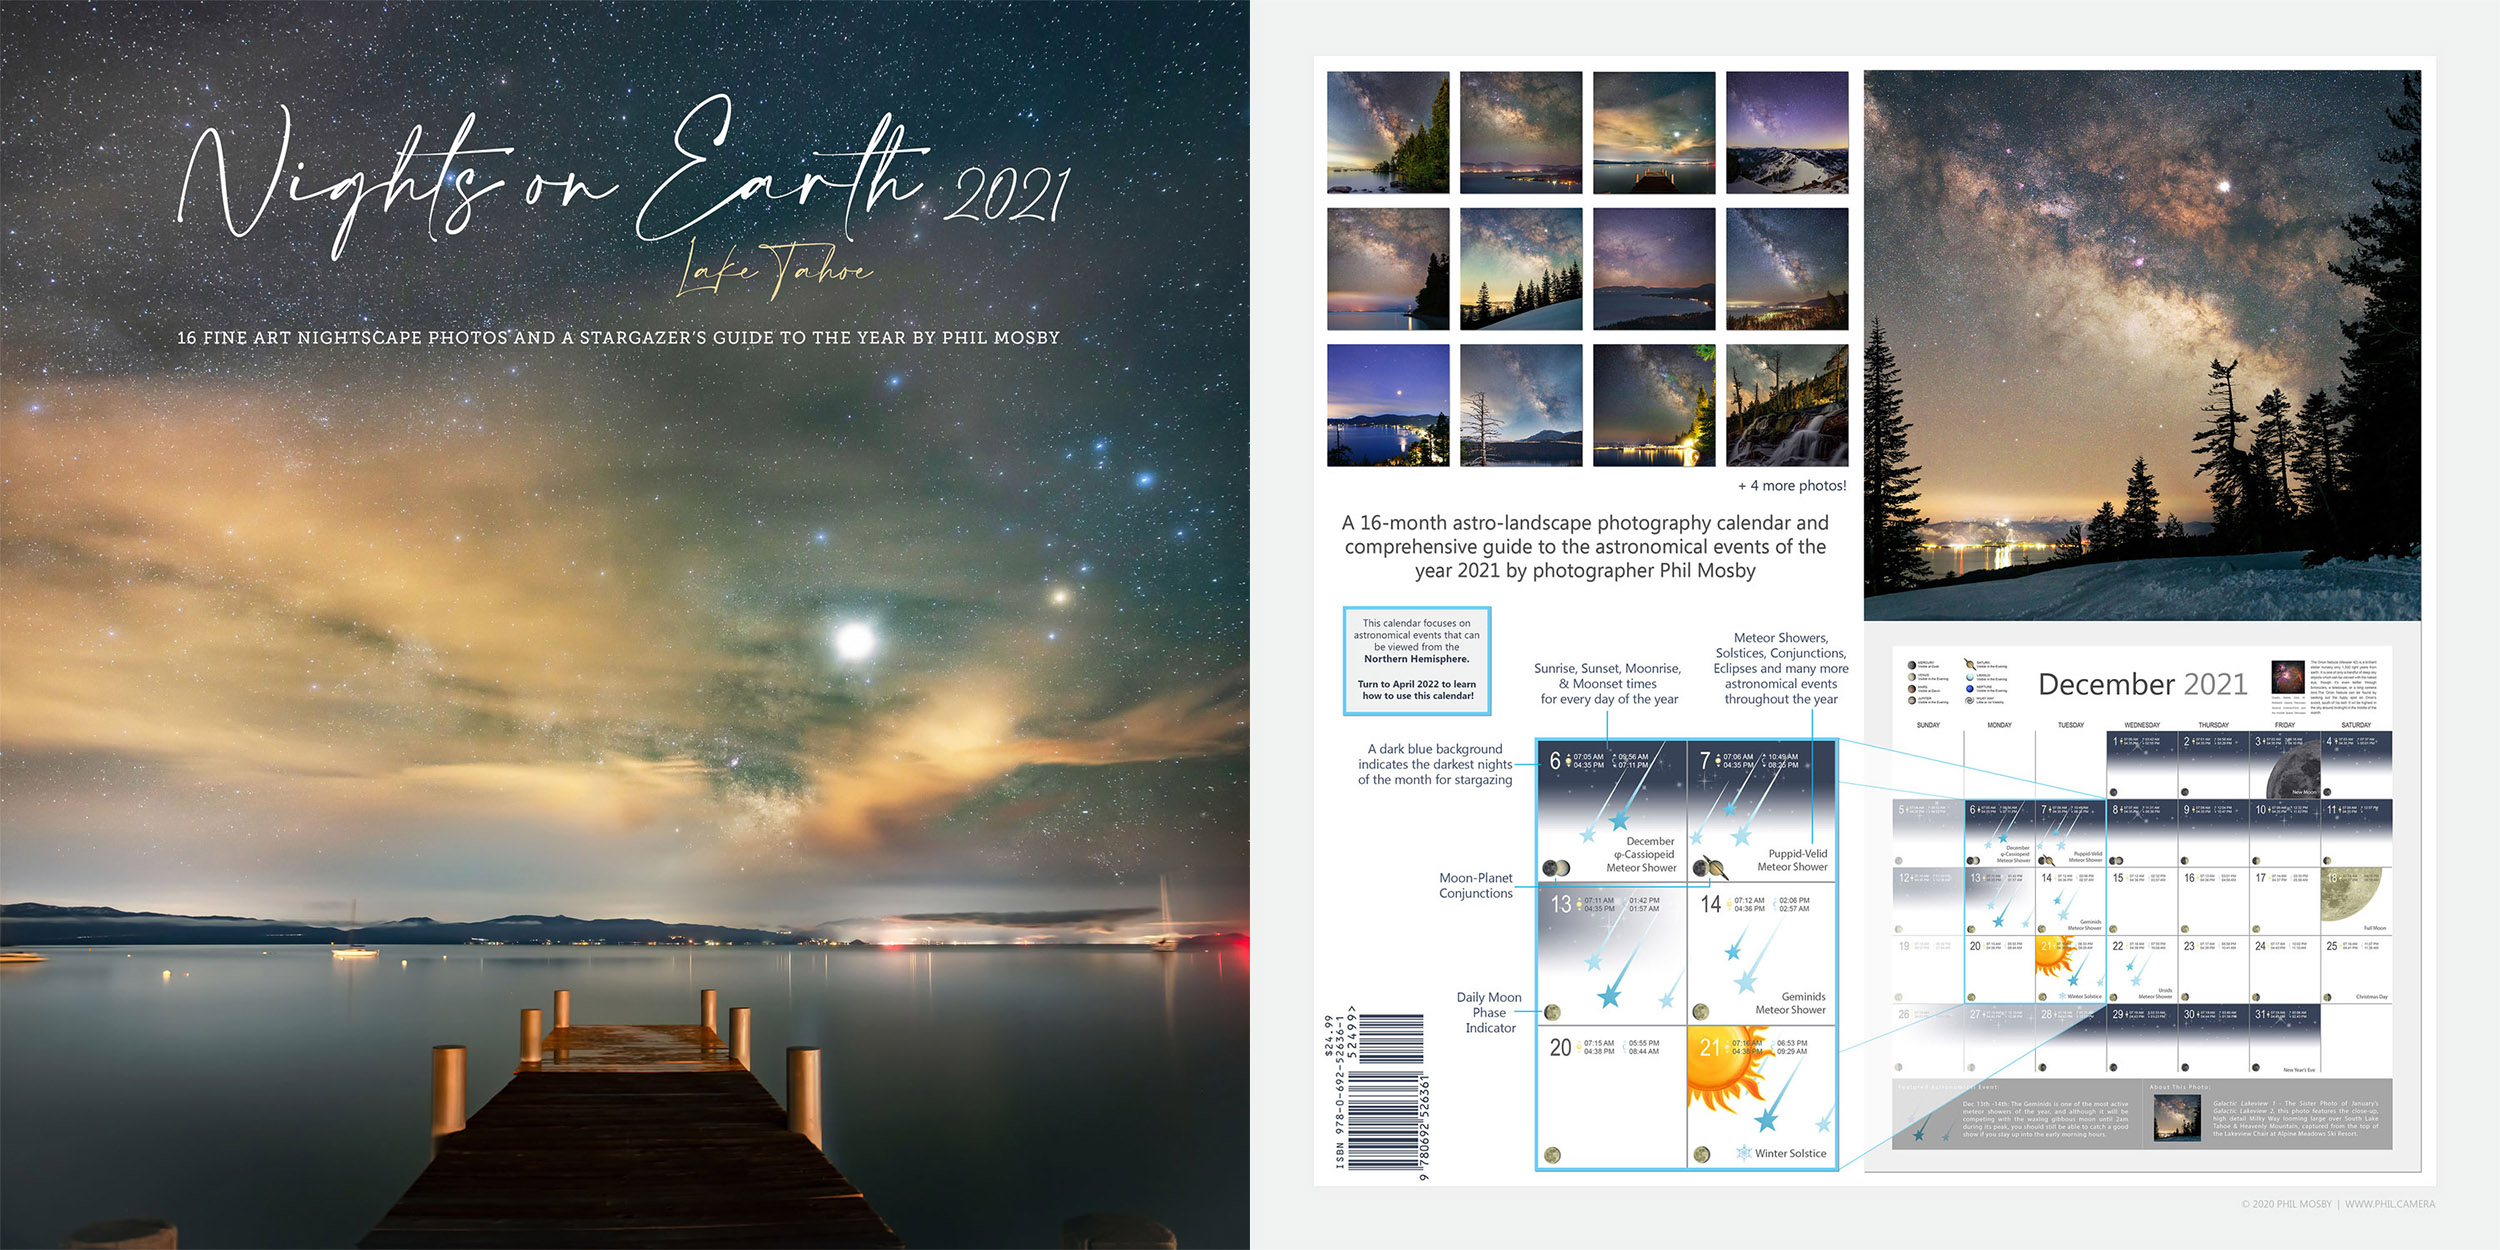 nights-on-earth-2021-nightscape-photography-calendar-and-stargazer-s-guide-to-the-night-sky-by